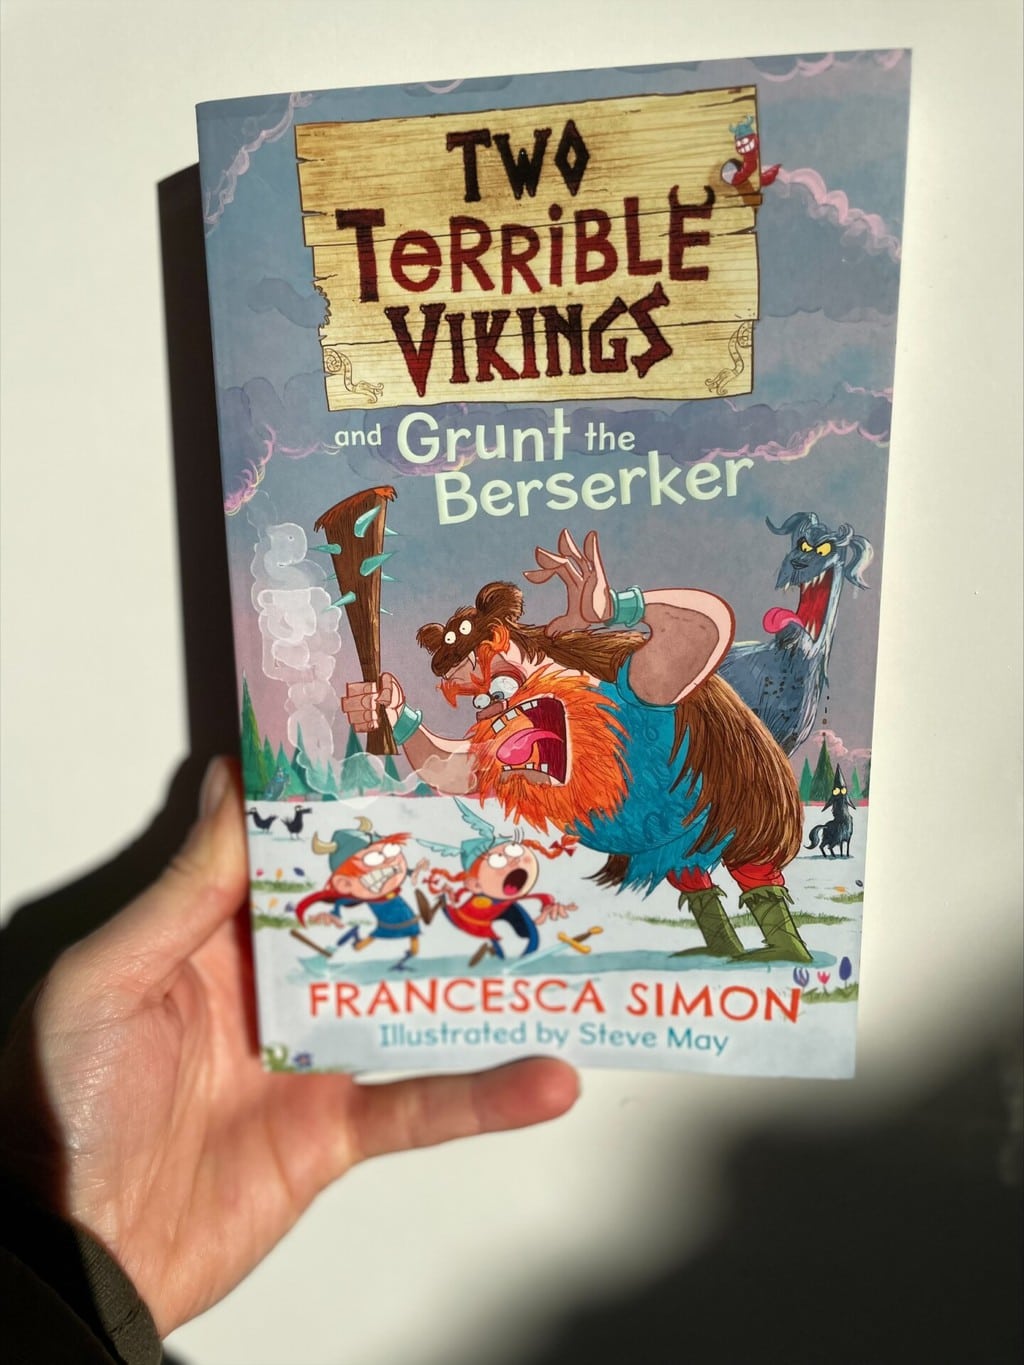 TwTwo Terrible Vikings and Grunt the BeserkerTwo Terrible Vikings and Grunt the Beserkero Terrible Vikings and Grunt the Beserker